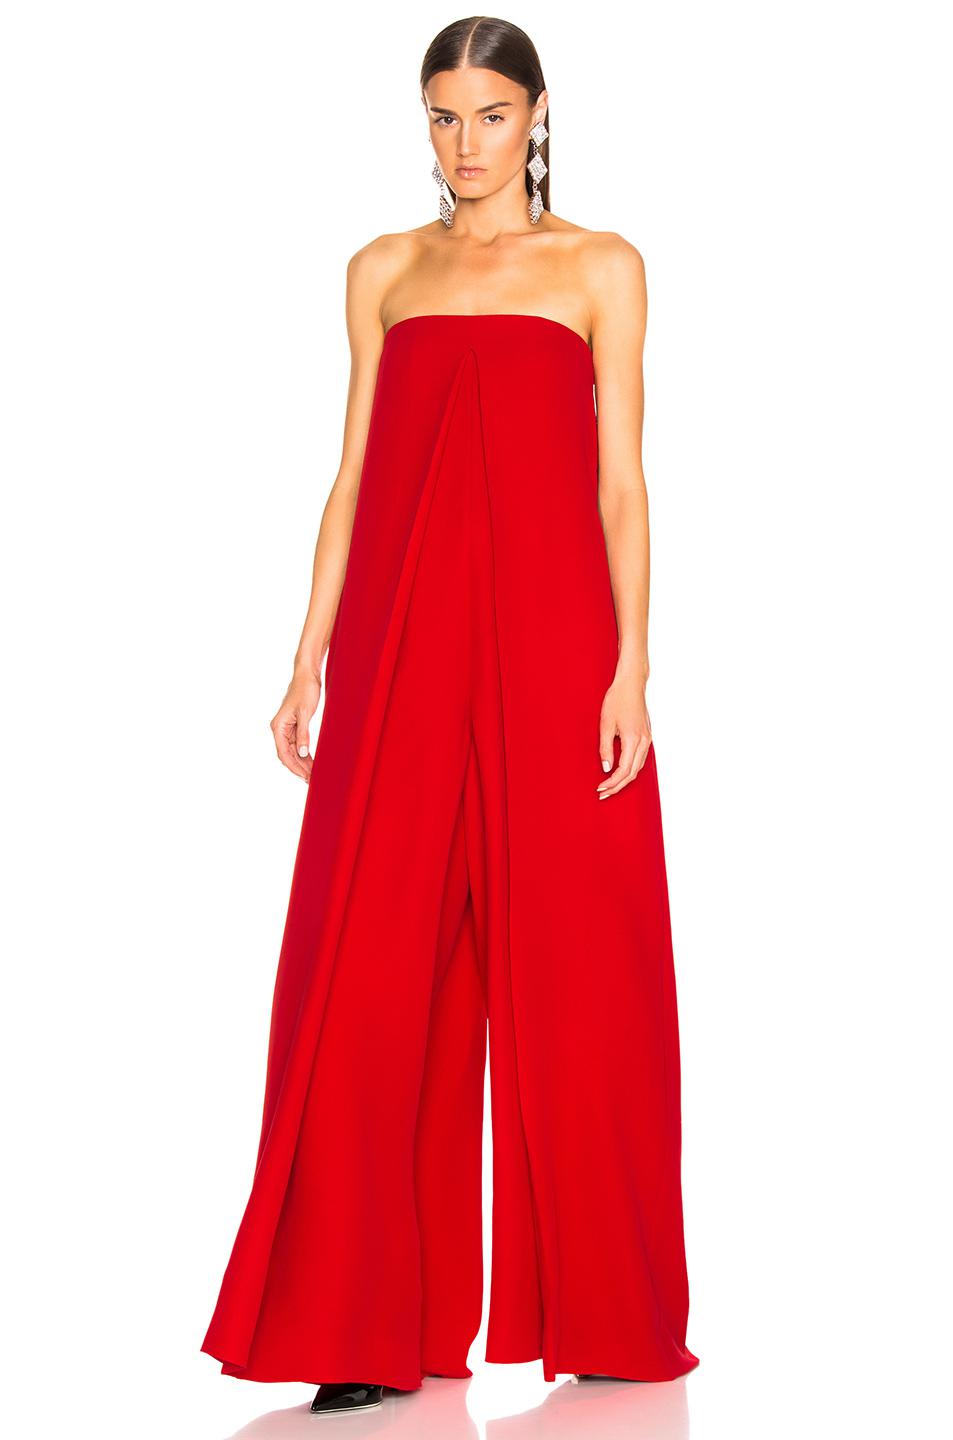 valentino jumpsuit OFF-63% Delivery